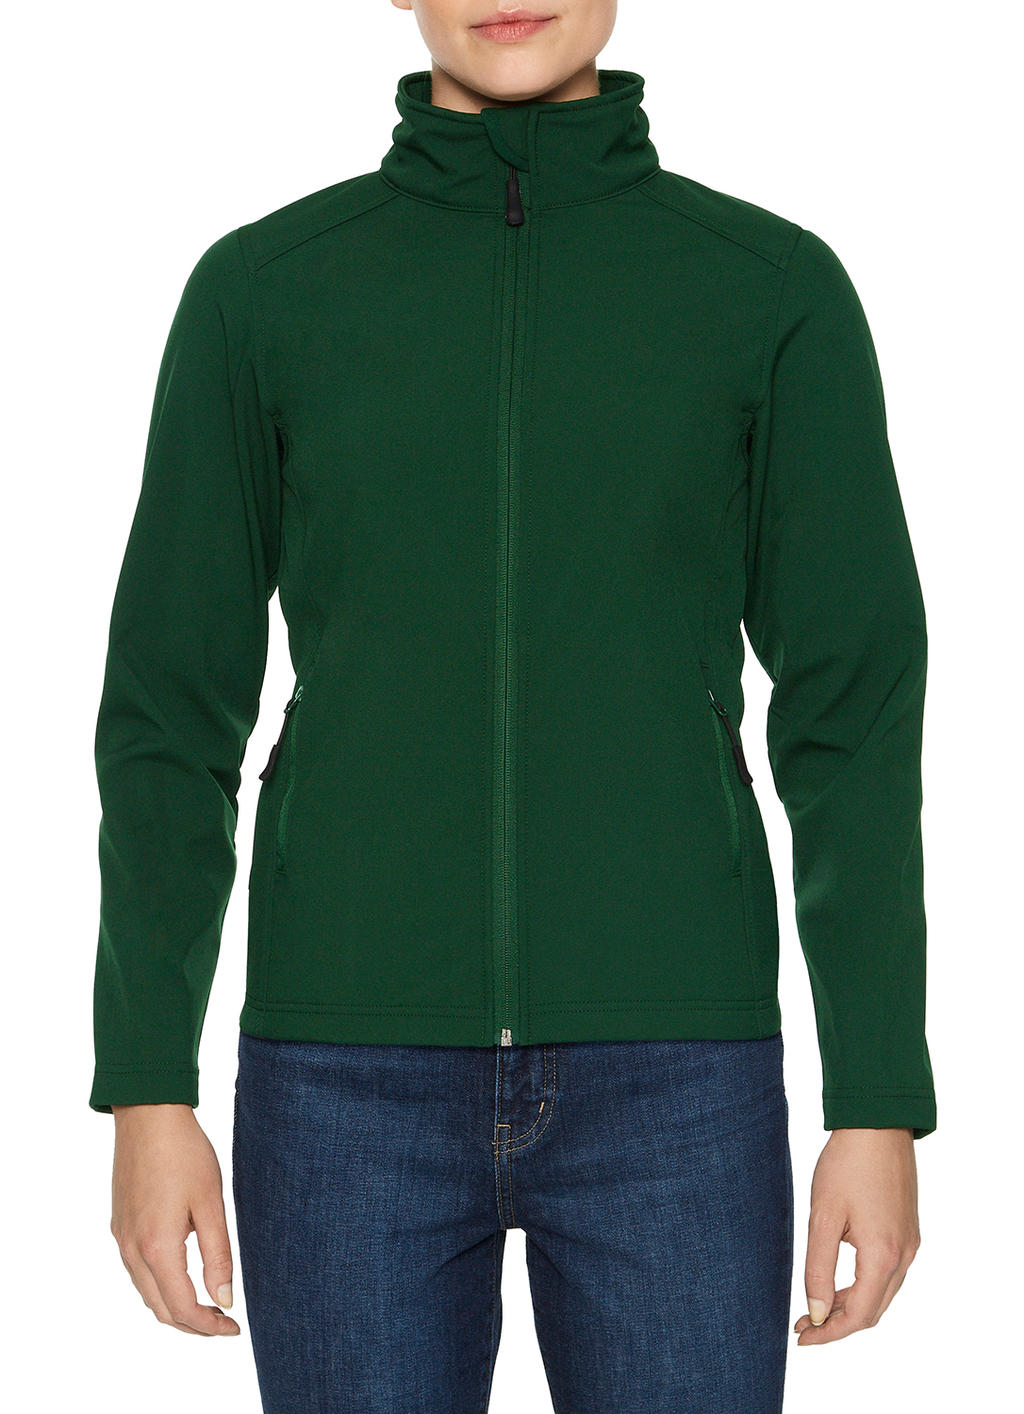  Hammer? Ladies Softshell Jacket in Farbe Forest Green